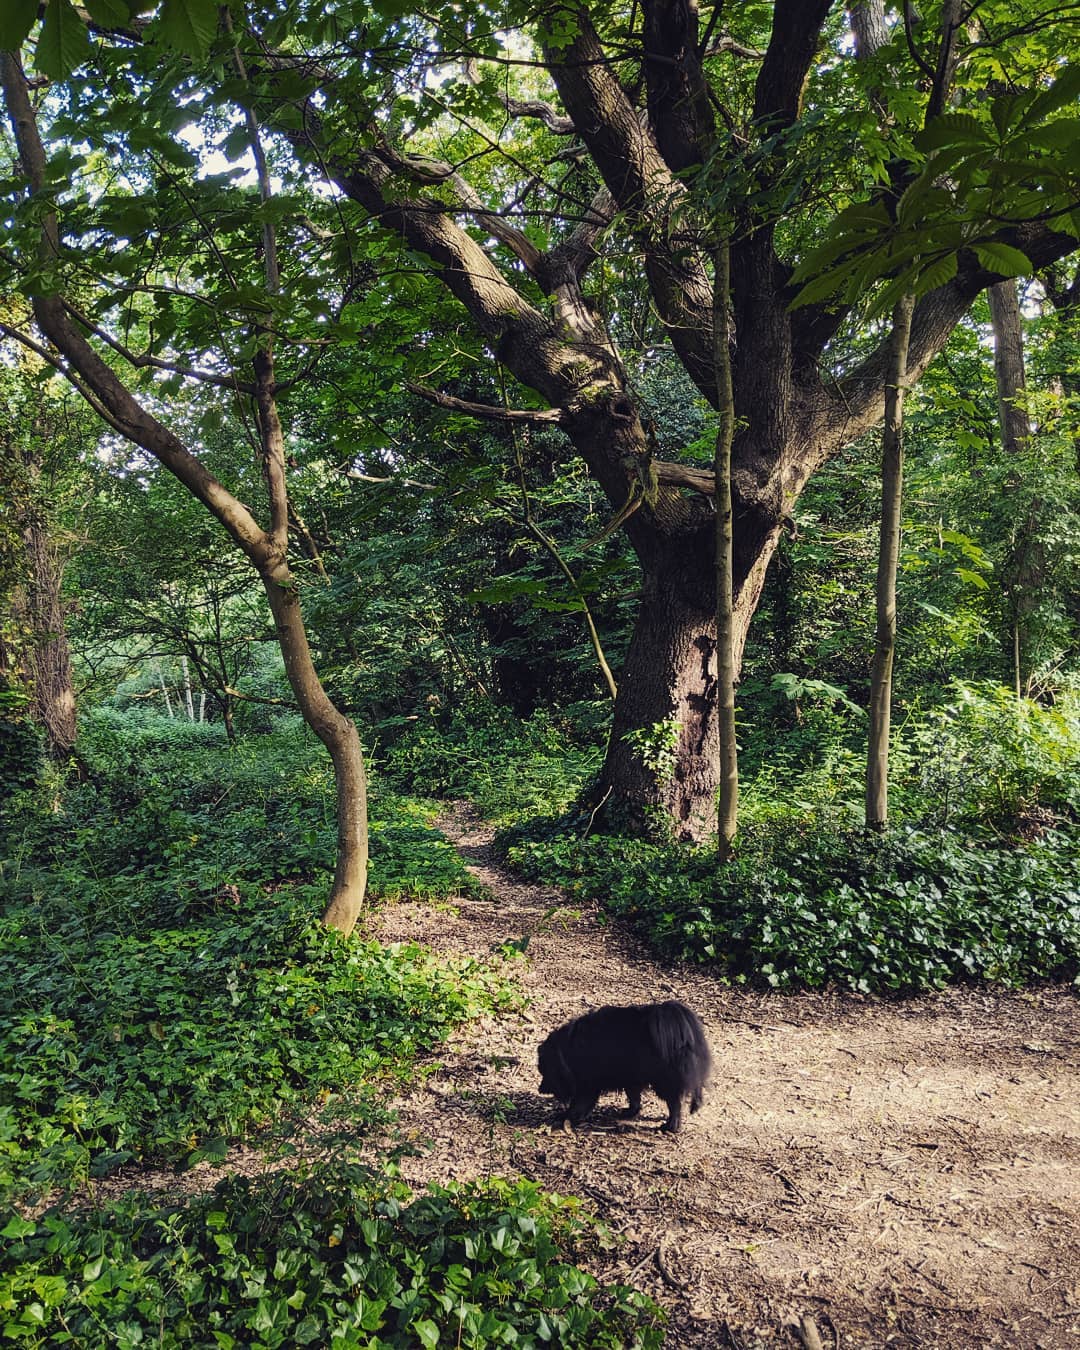 The dog amongst the woods